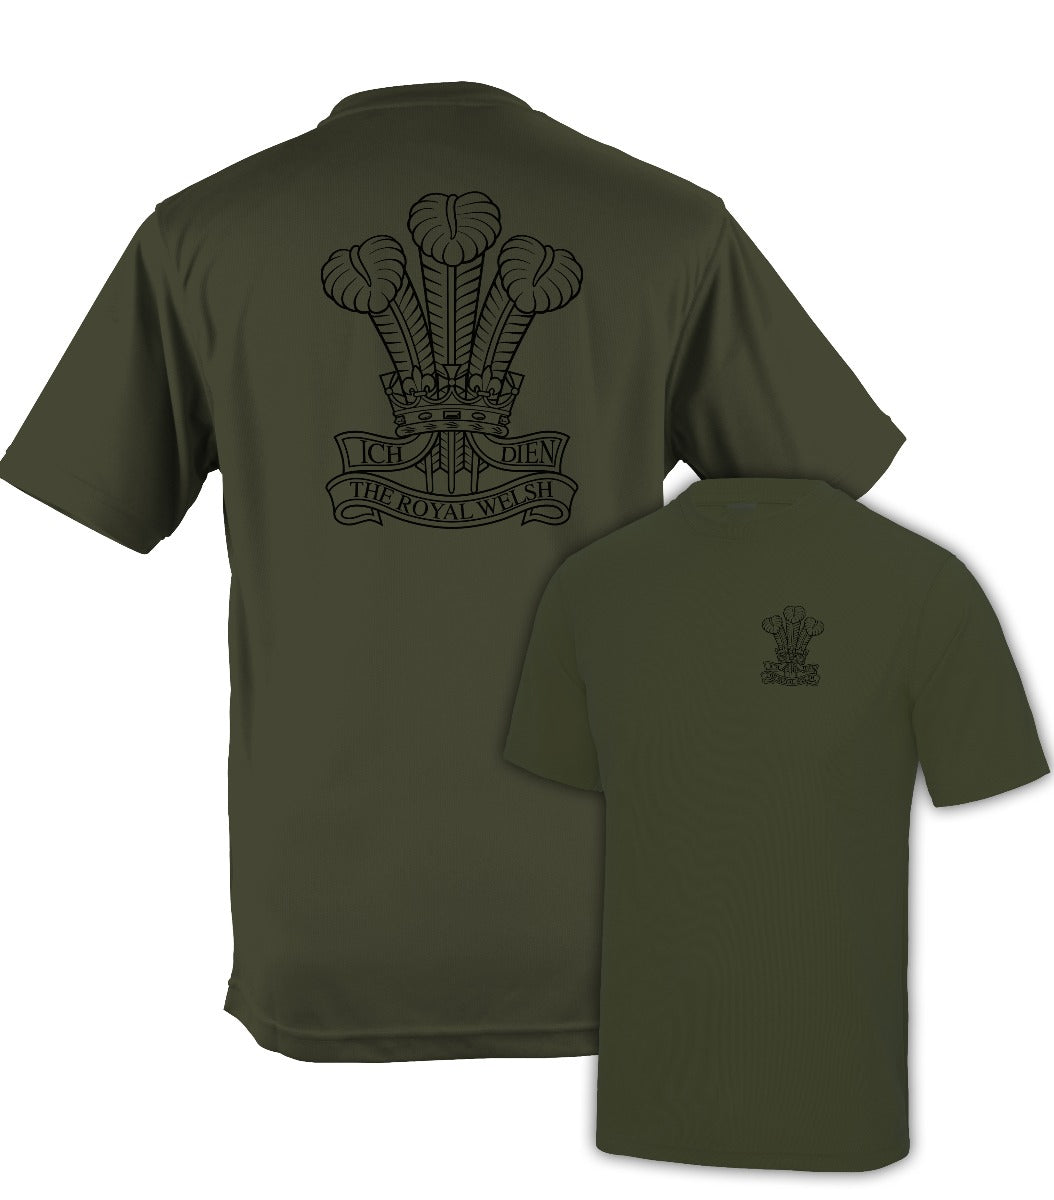 Fully Printed The Royal Welsh (R WELSH) Wicking Fabric T-shirt